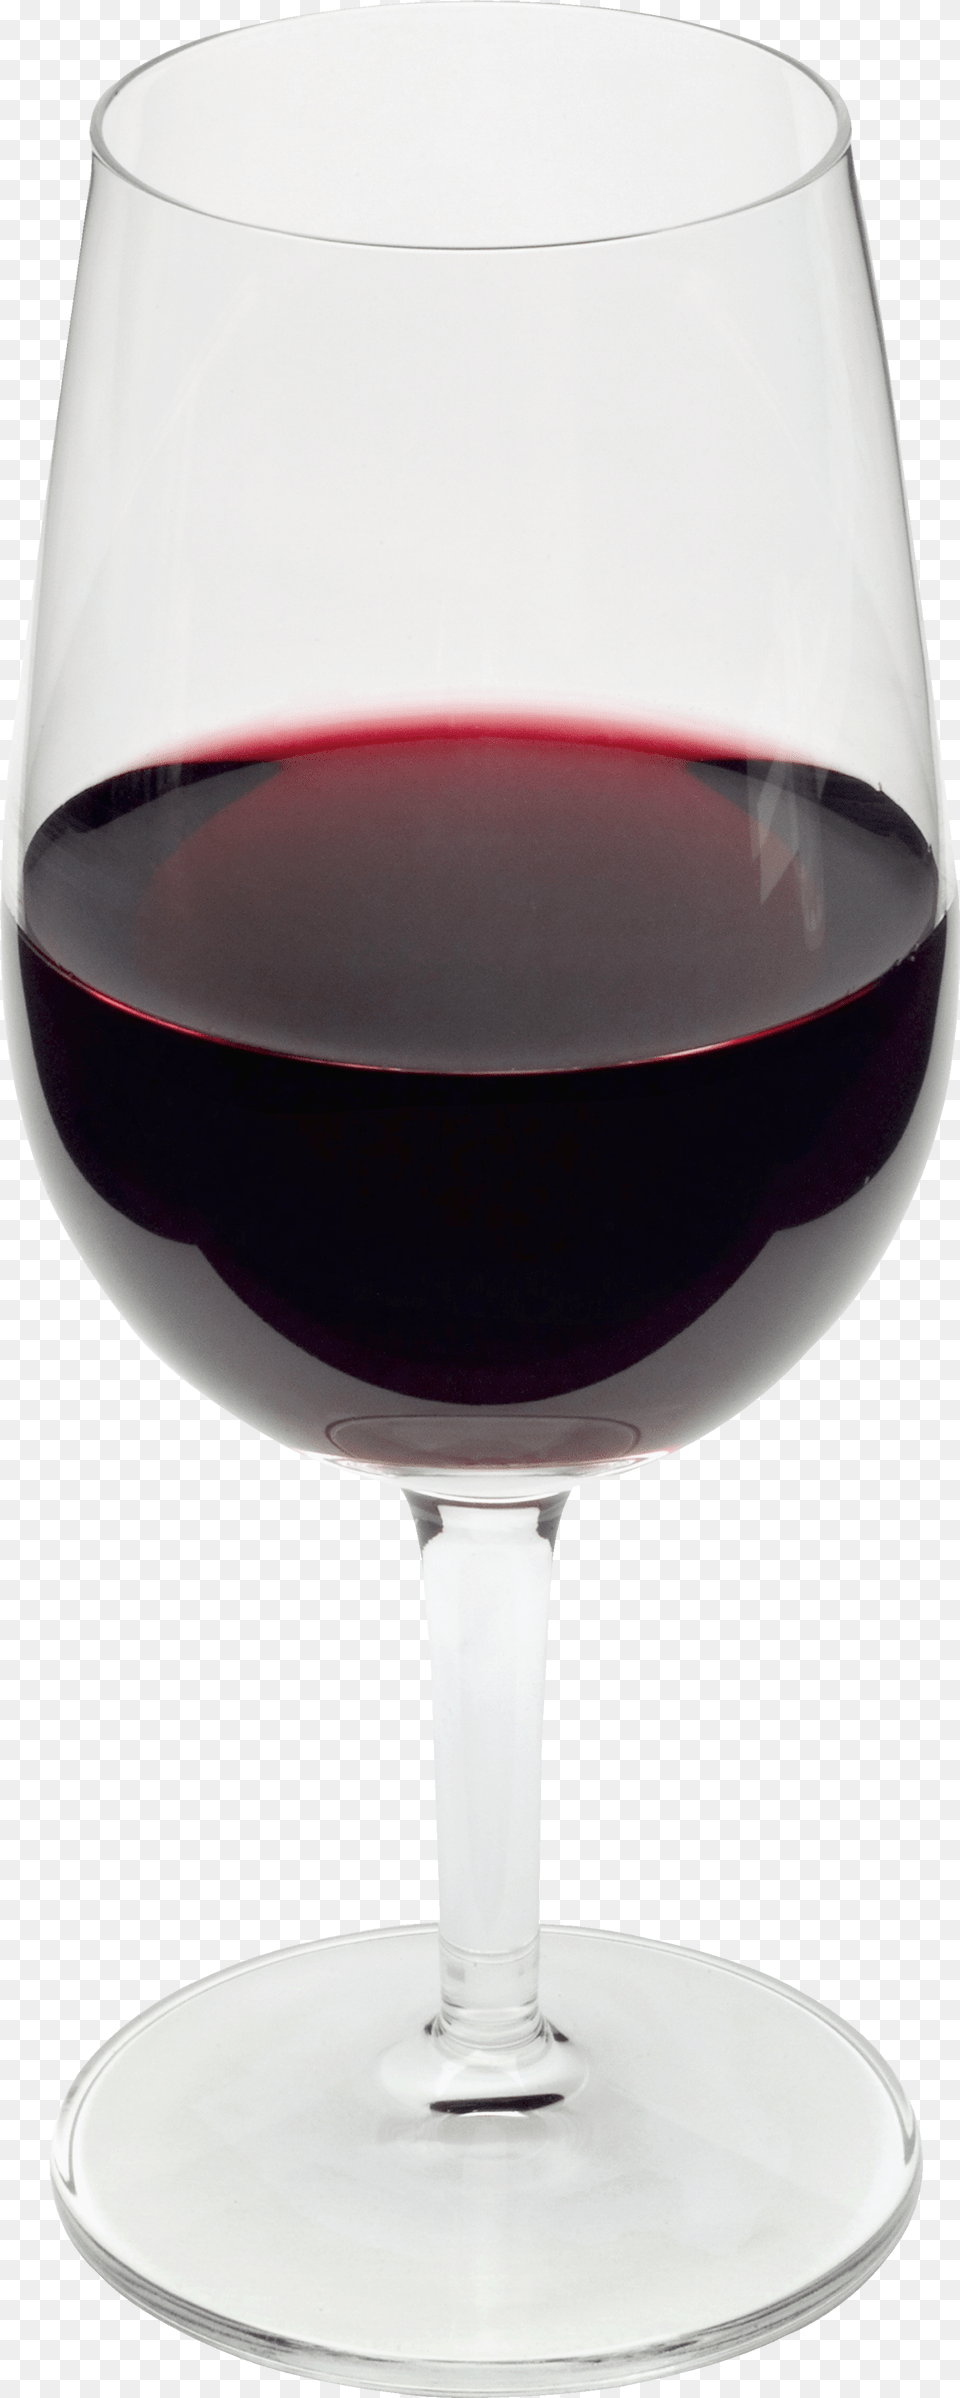 Wine Bottle And Glass Dh Transparent Background Red Wine Glass, Alcohol, Beverage, Liquor, Red Wine Free Png Download